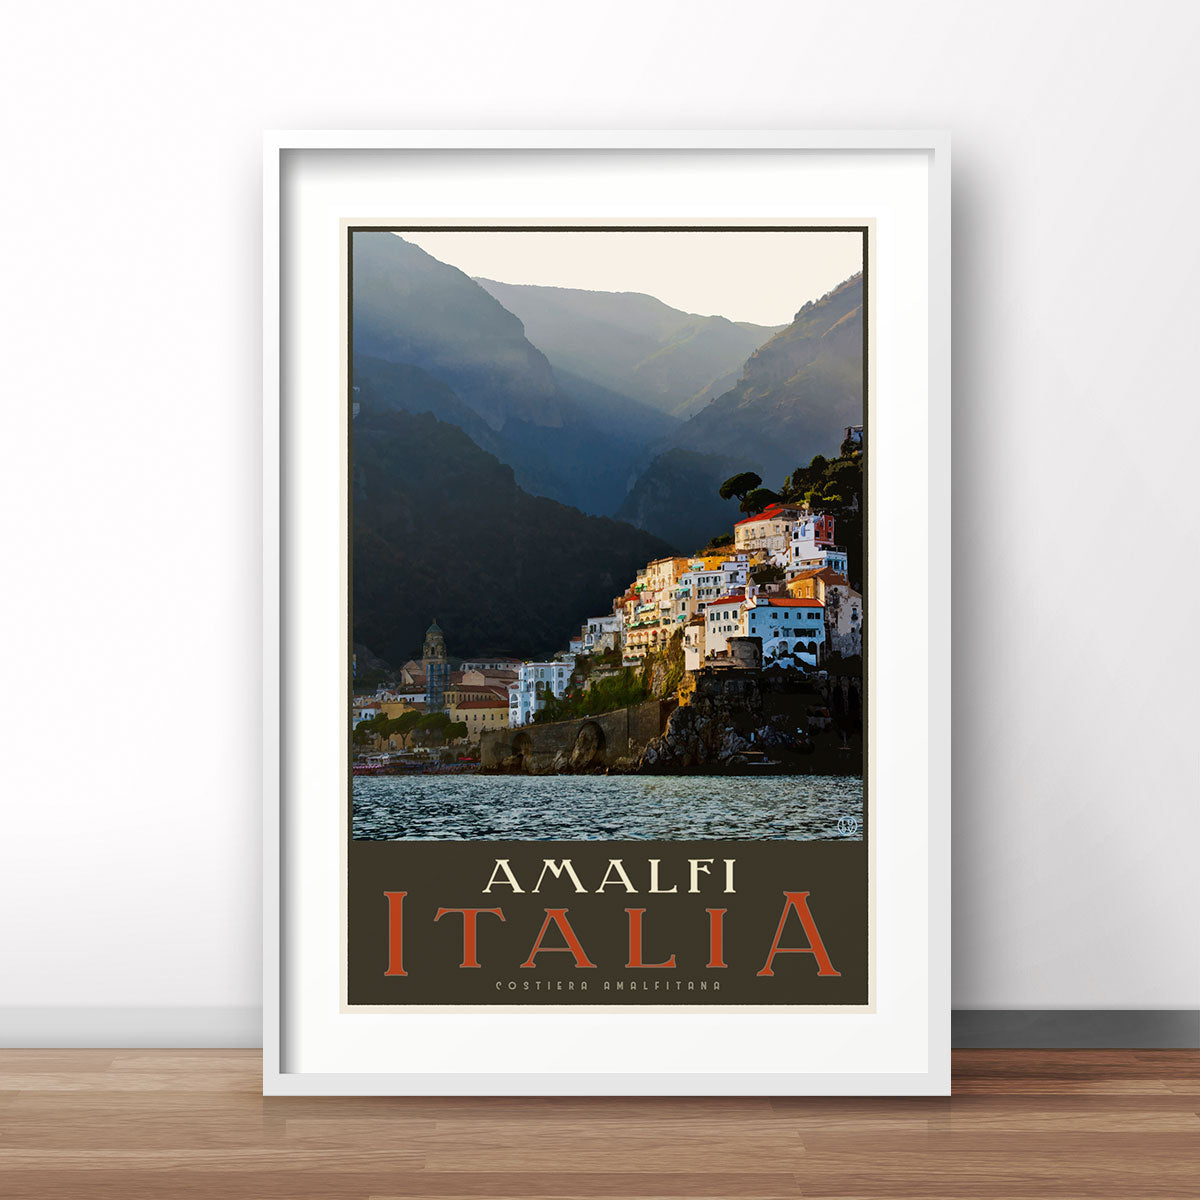 Amalfi Italy retro vintage travel style poster by Places We Luv 